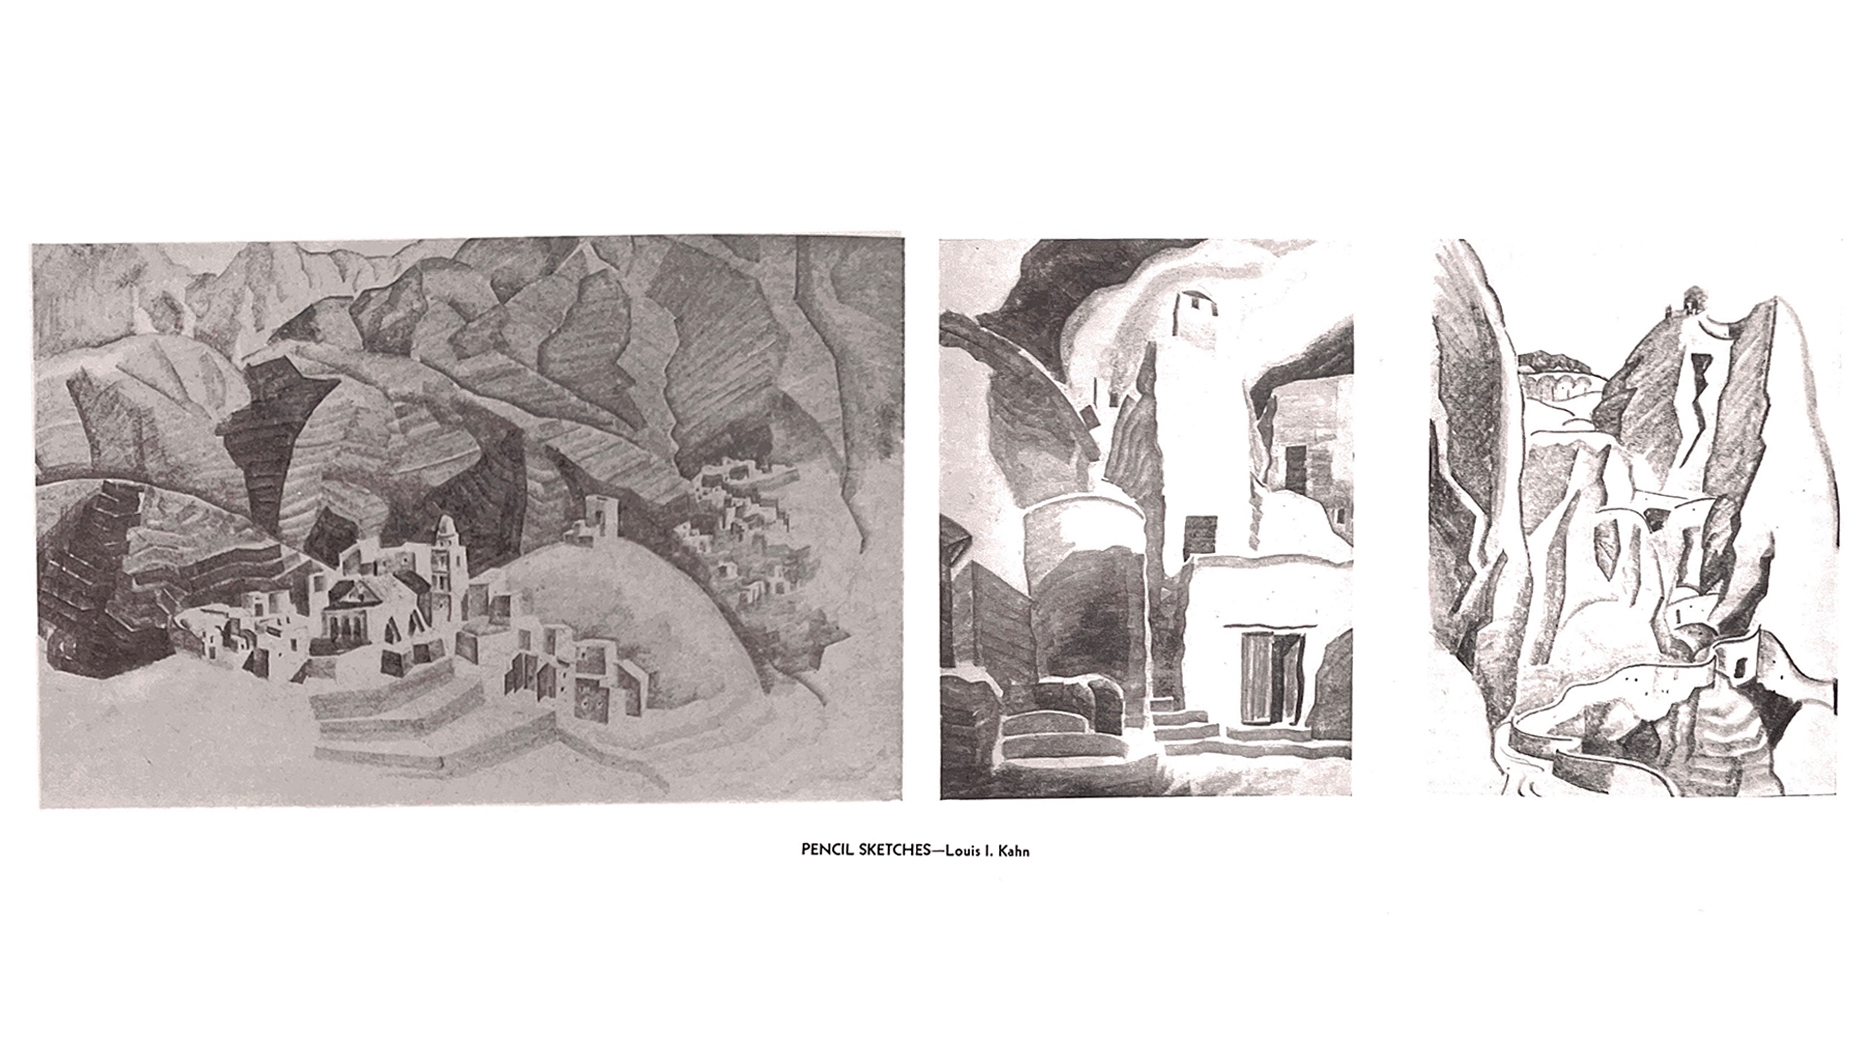 Louis I. Kahn, Pencil Sketches showing houses within nature in "The Value and Aim in Sketching". From Merrill, Michael, ed. Louis Kahn - the Importance of Drawing. Zürich: Lars Müller Publishers, 2021, 46